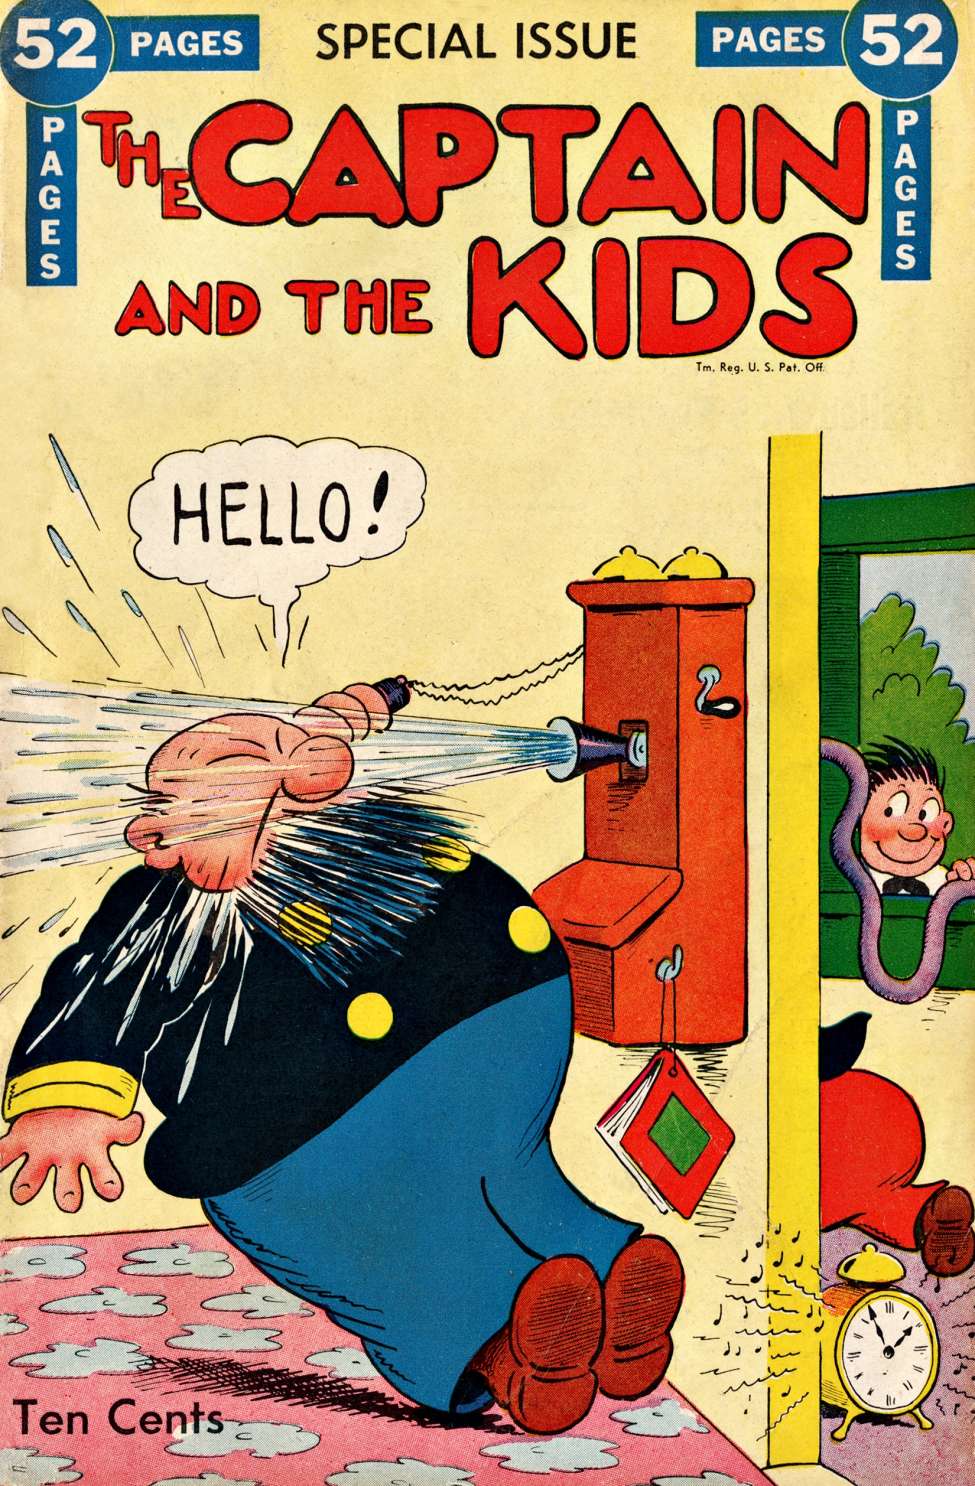 Book Cover For The Captain and the Kids Special